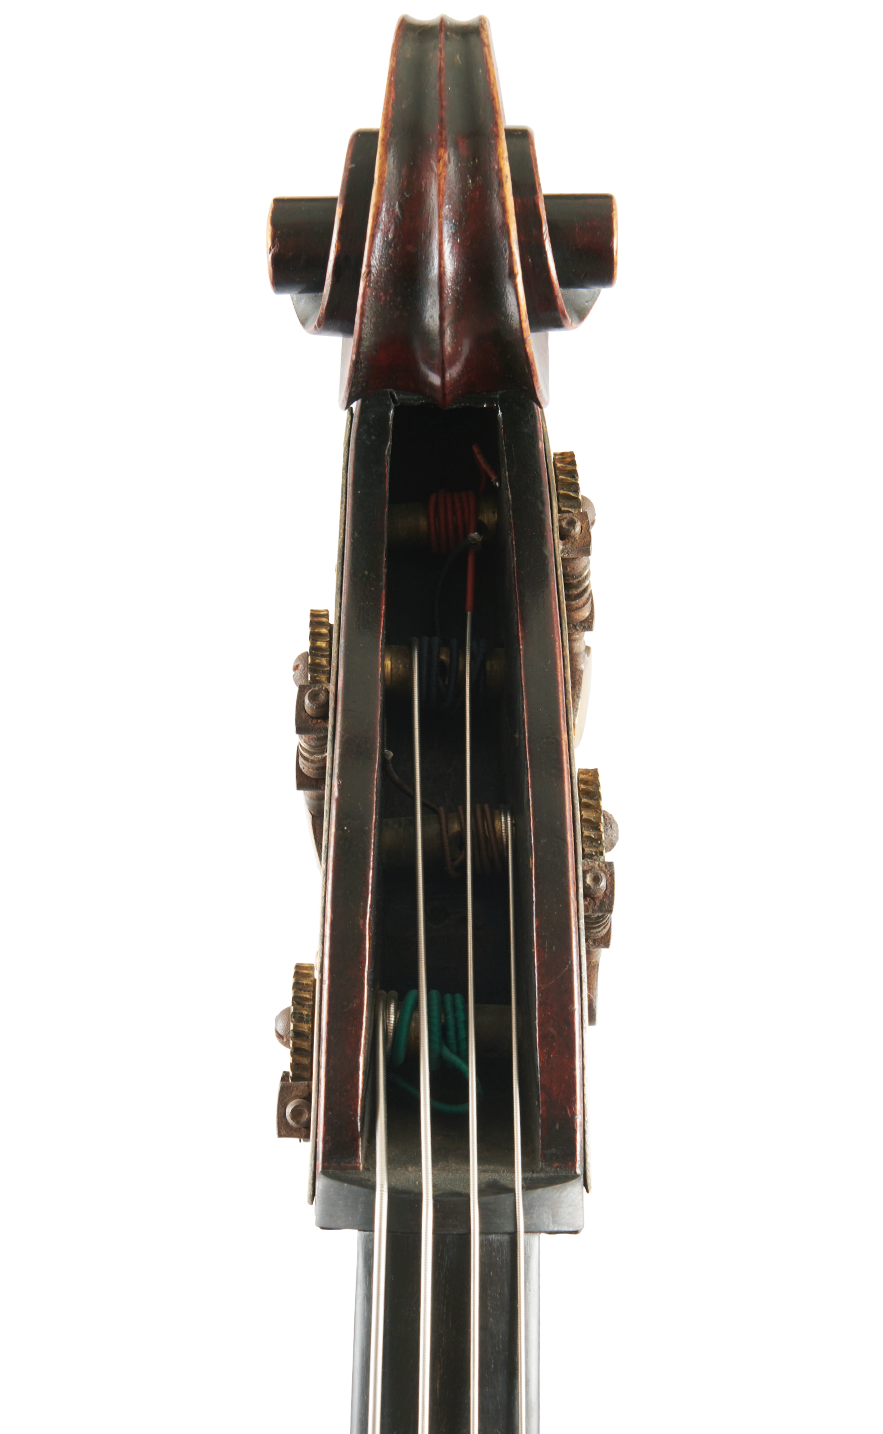 Fuber Double Bass front scroll